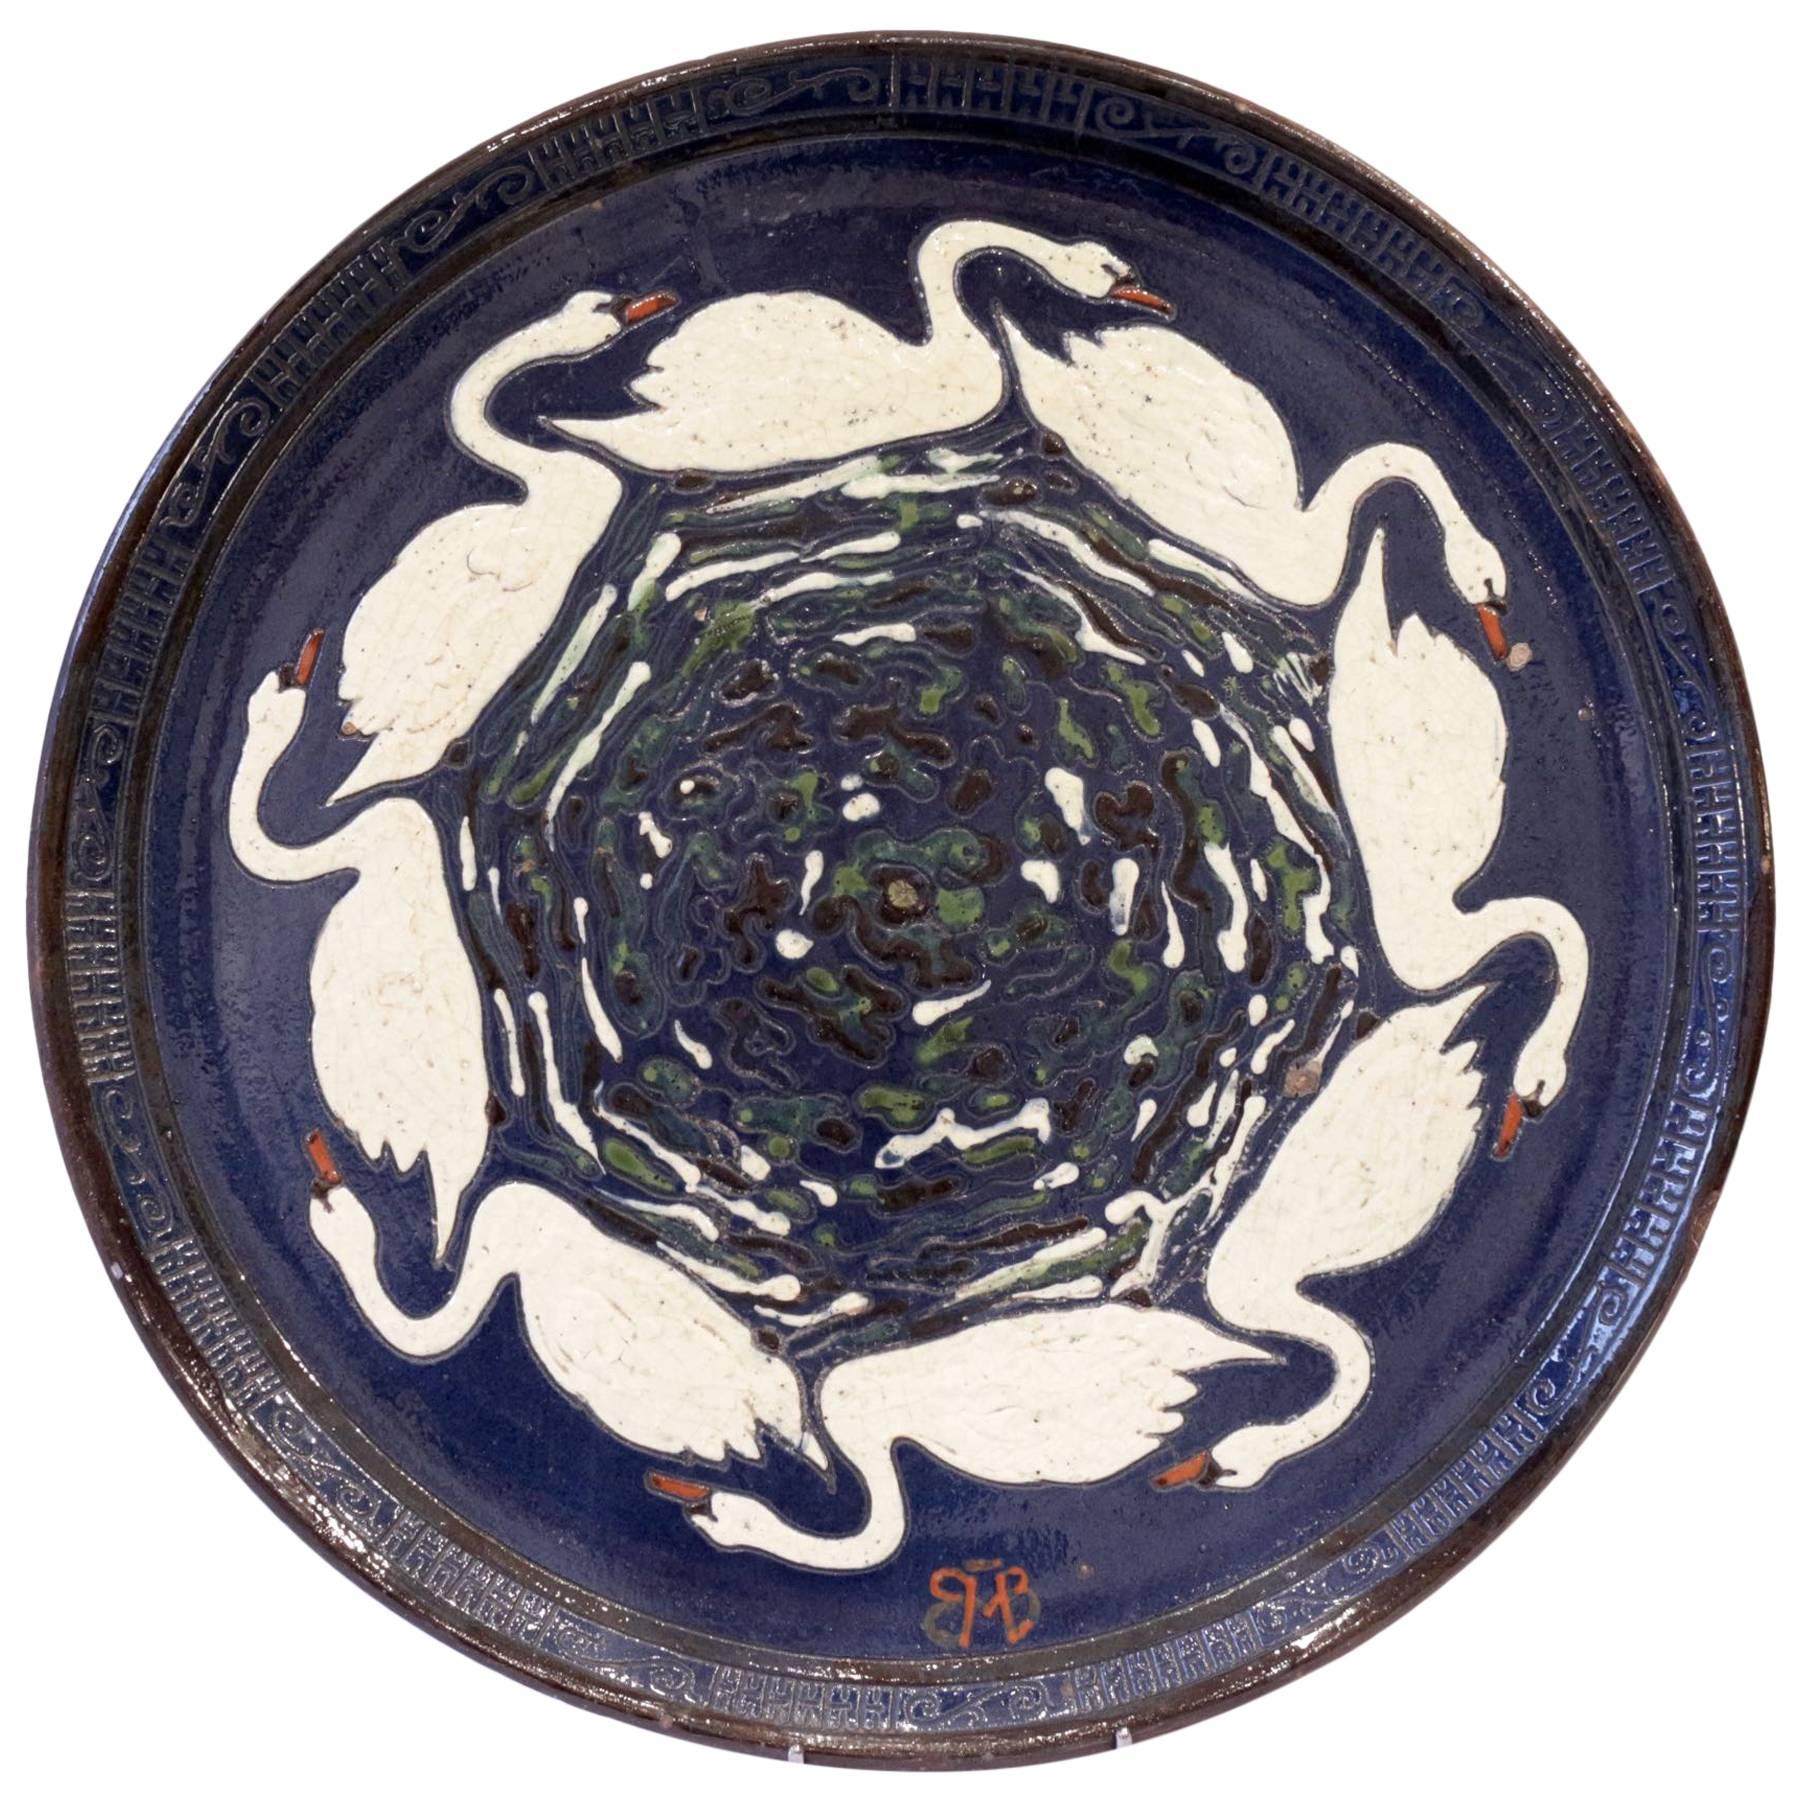 Rare Sandstone Enameled Dish by Paul Jacquet with a Decor of Swans, circa 1915